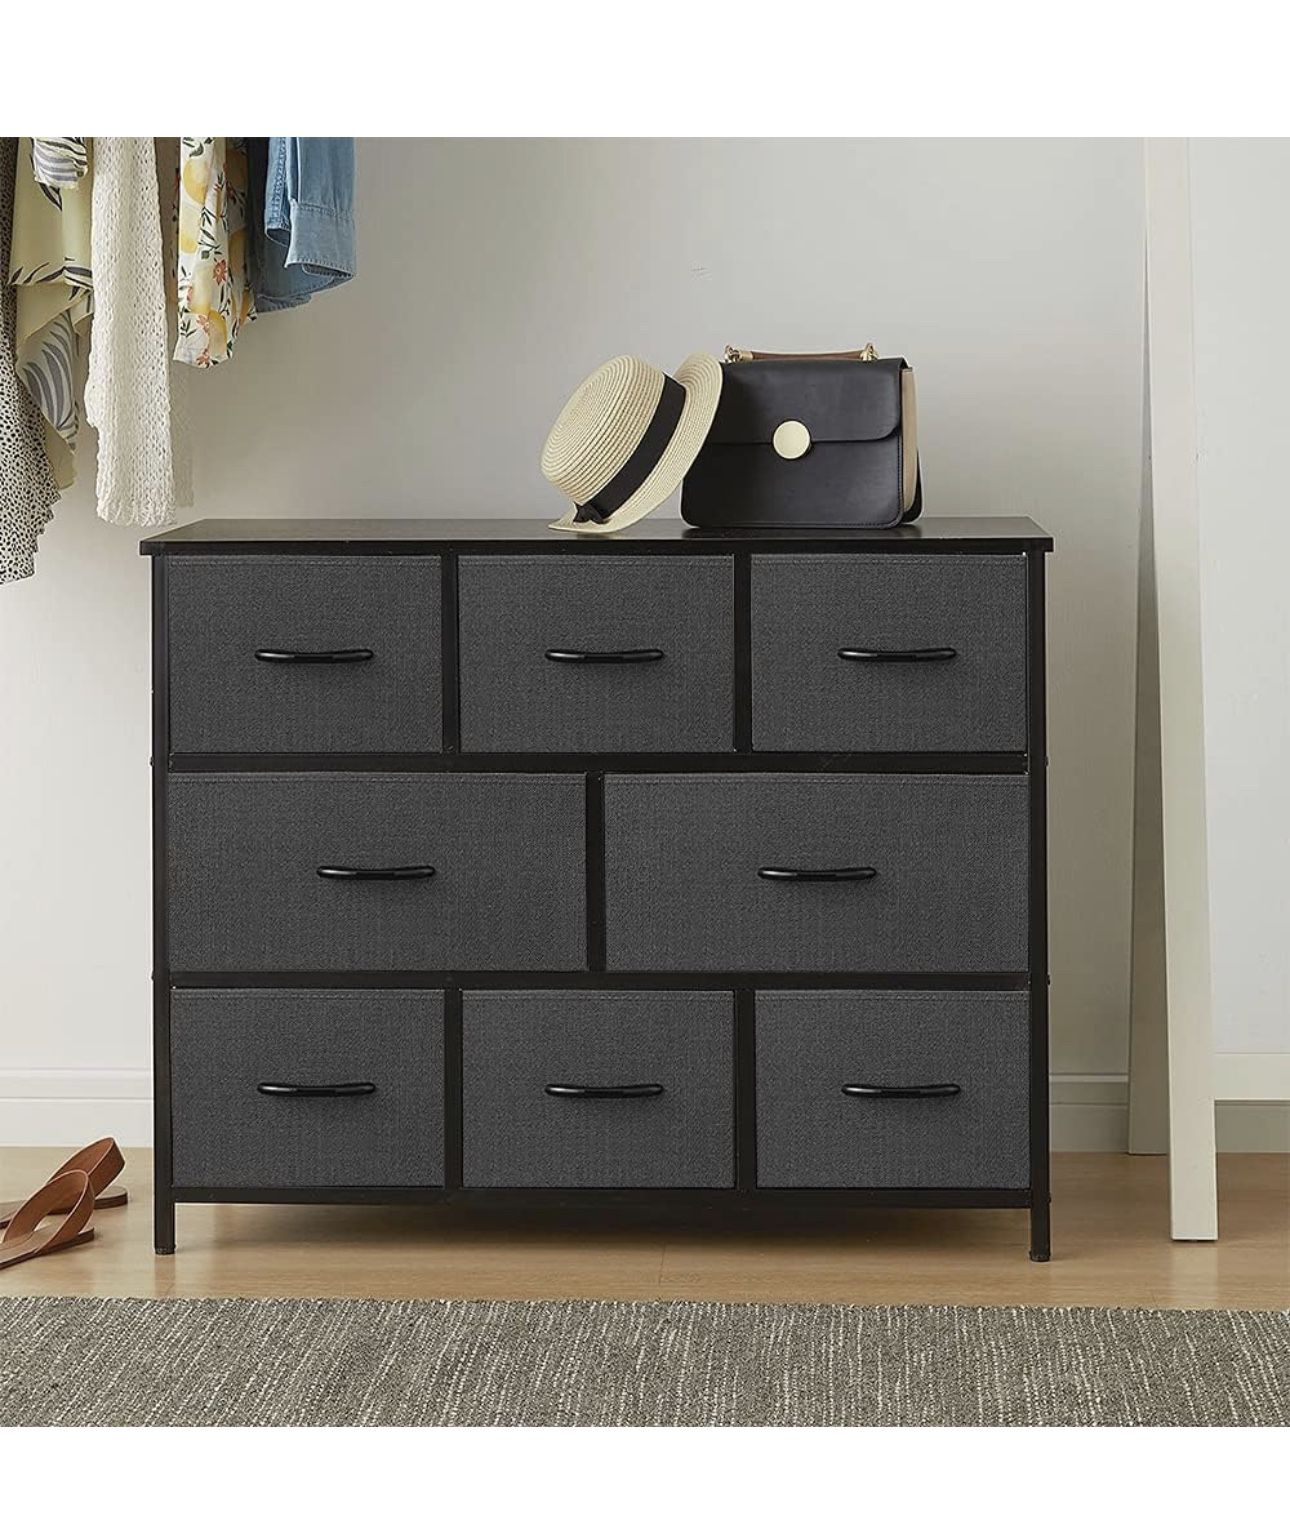 AZL1 Life Concept Extra Wide Dresser Storage Tower with Sturdy Steel Frame, 8 Drawers 